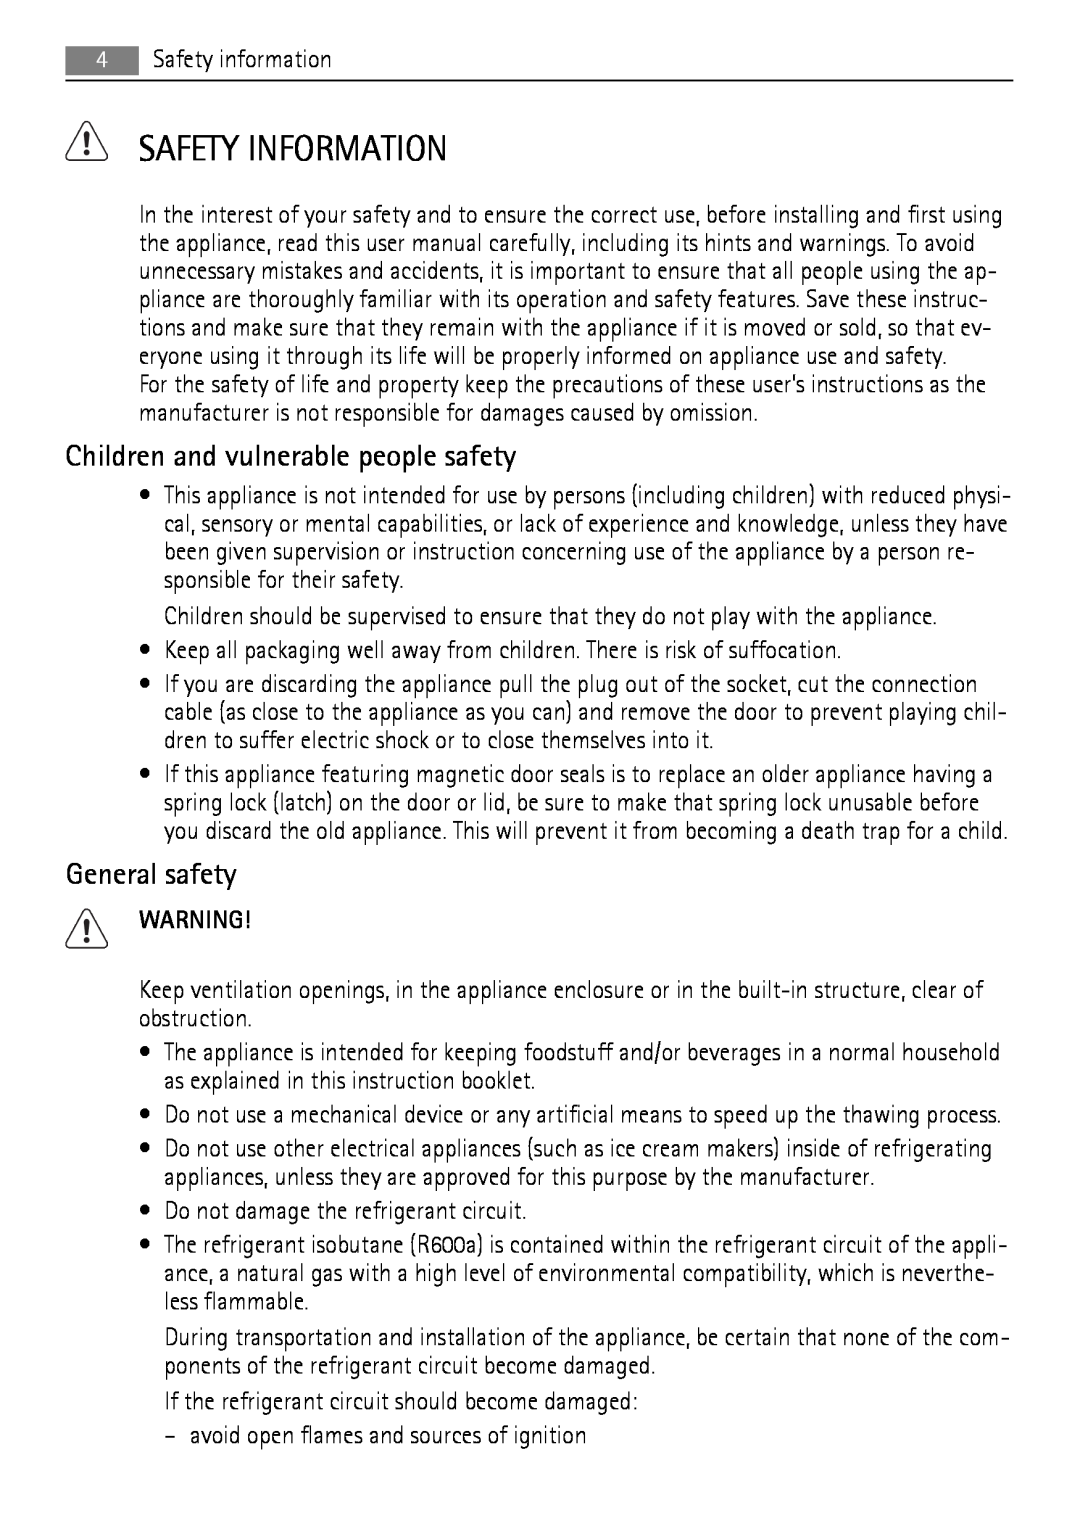 AEG SCT71900S0 user manual Safety Information, Children and vulnerable people safety, General safety 